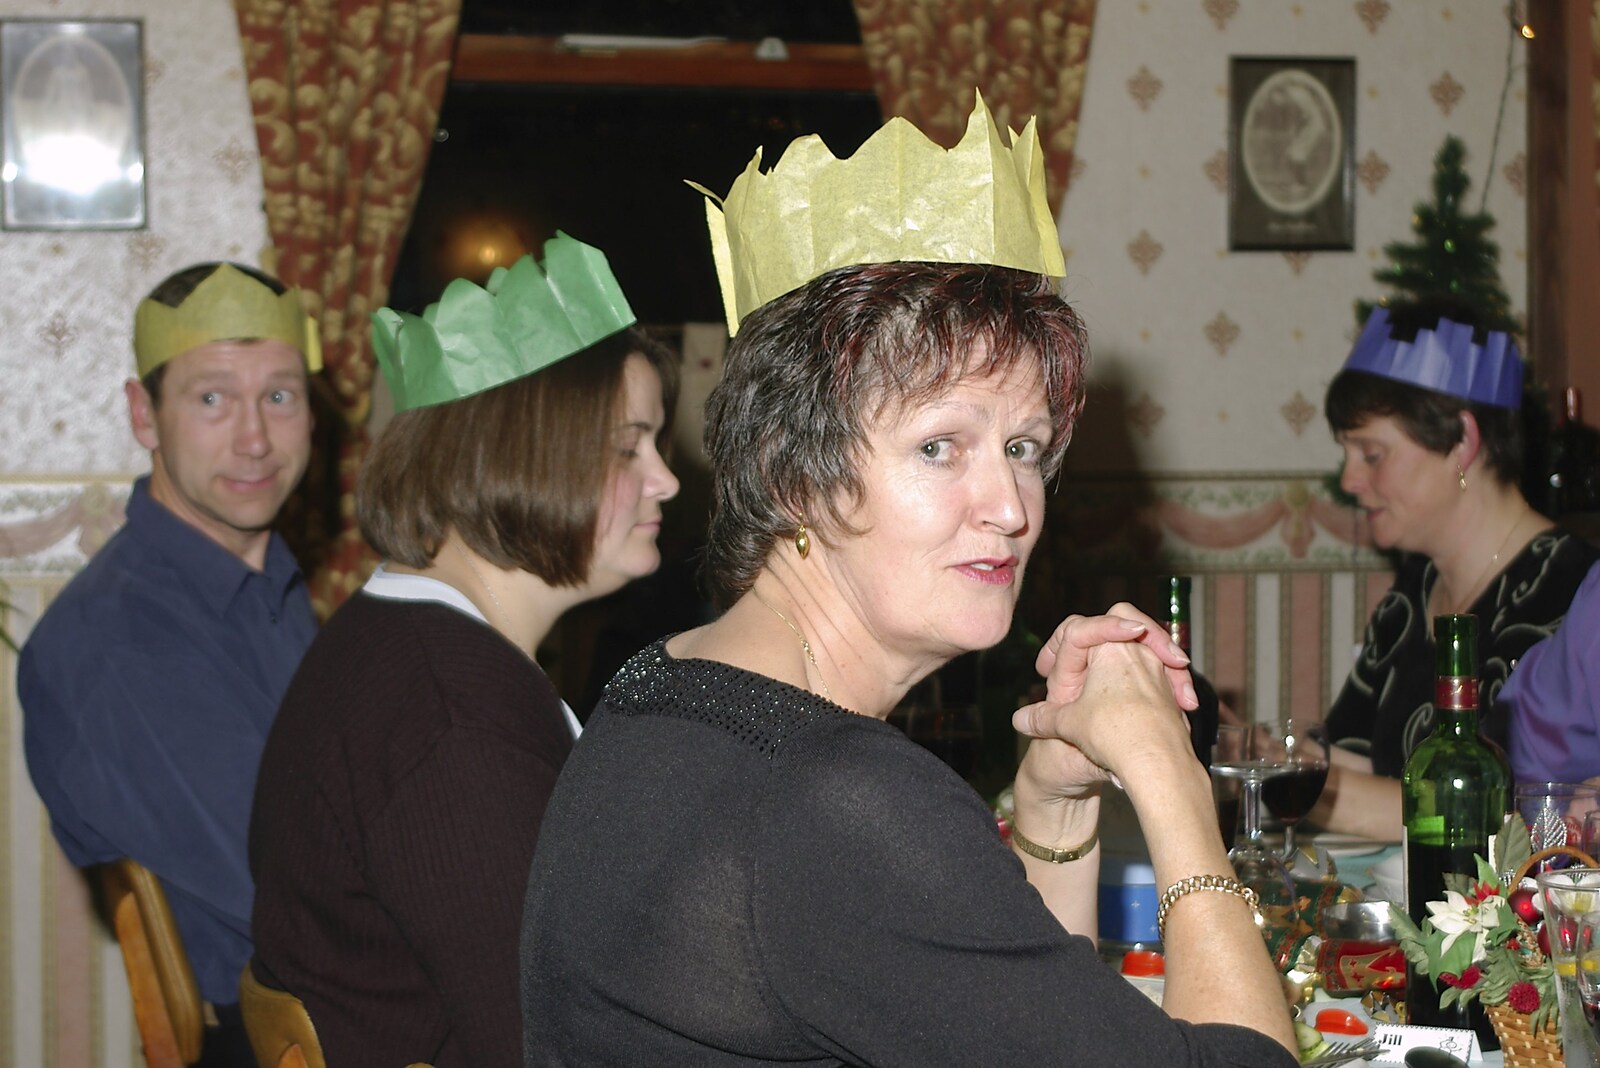 The BSCC Annual Dinner, The Brome Swan, Suffolk - 4th December 2004: Jill looks back